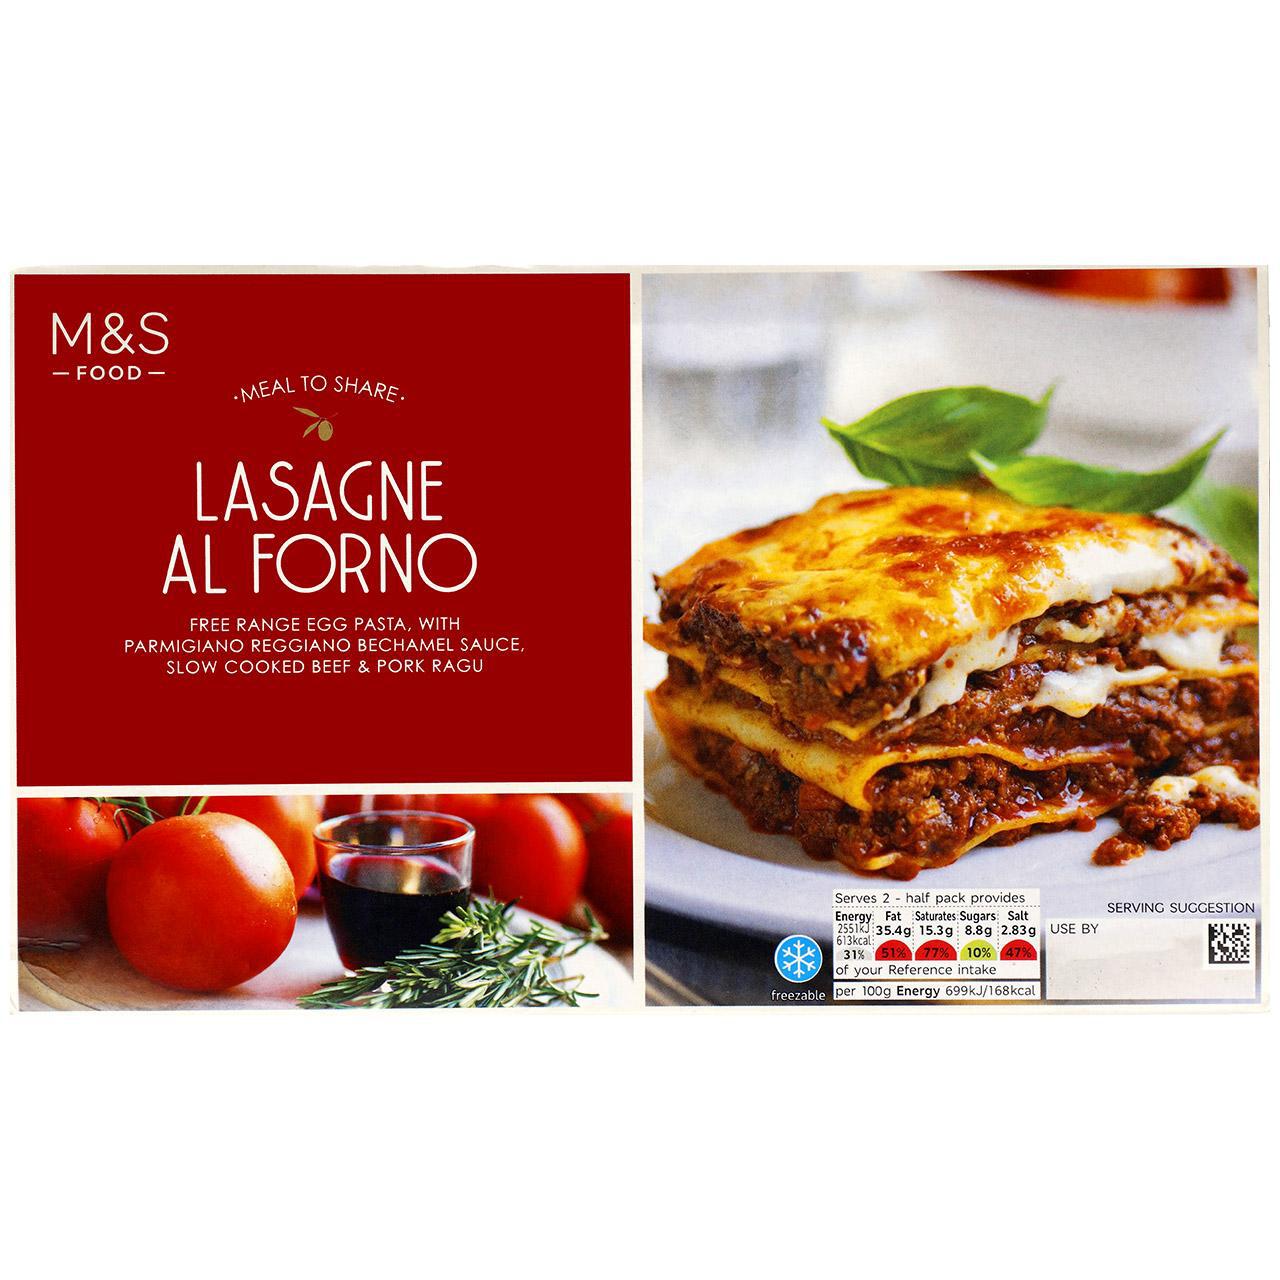 M&S Lasagne Al Forno Meal to Share 730g | Zoom